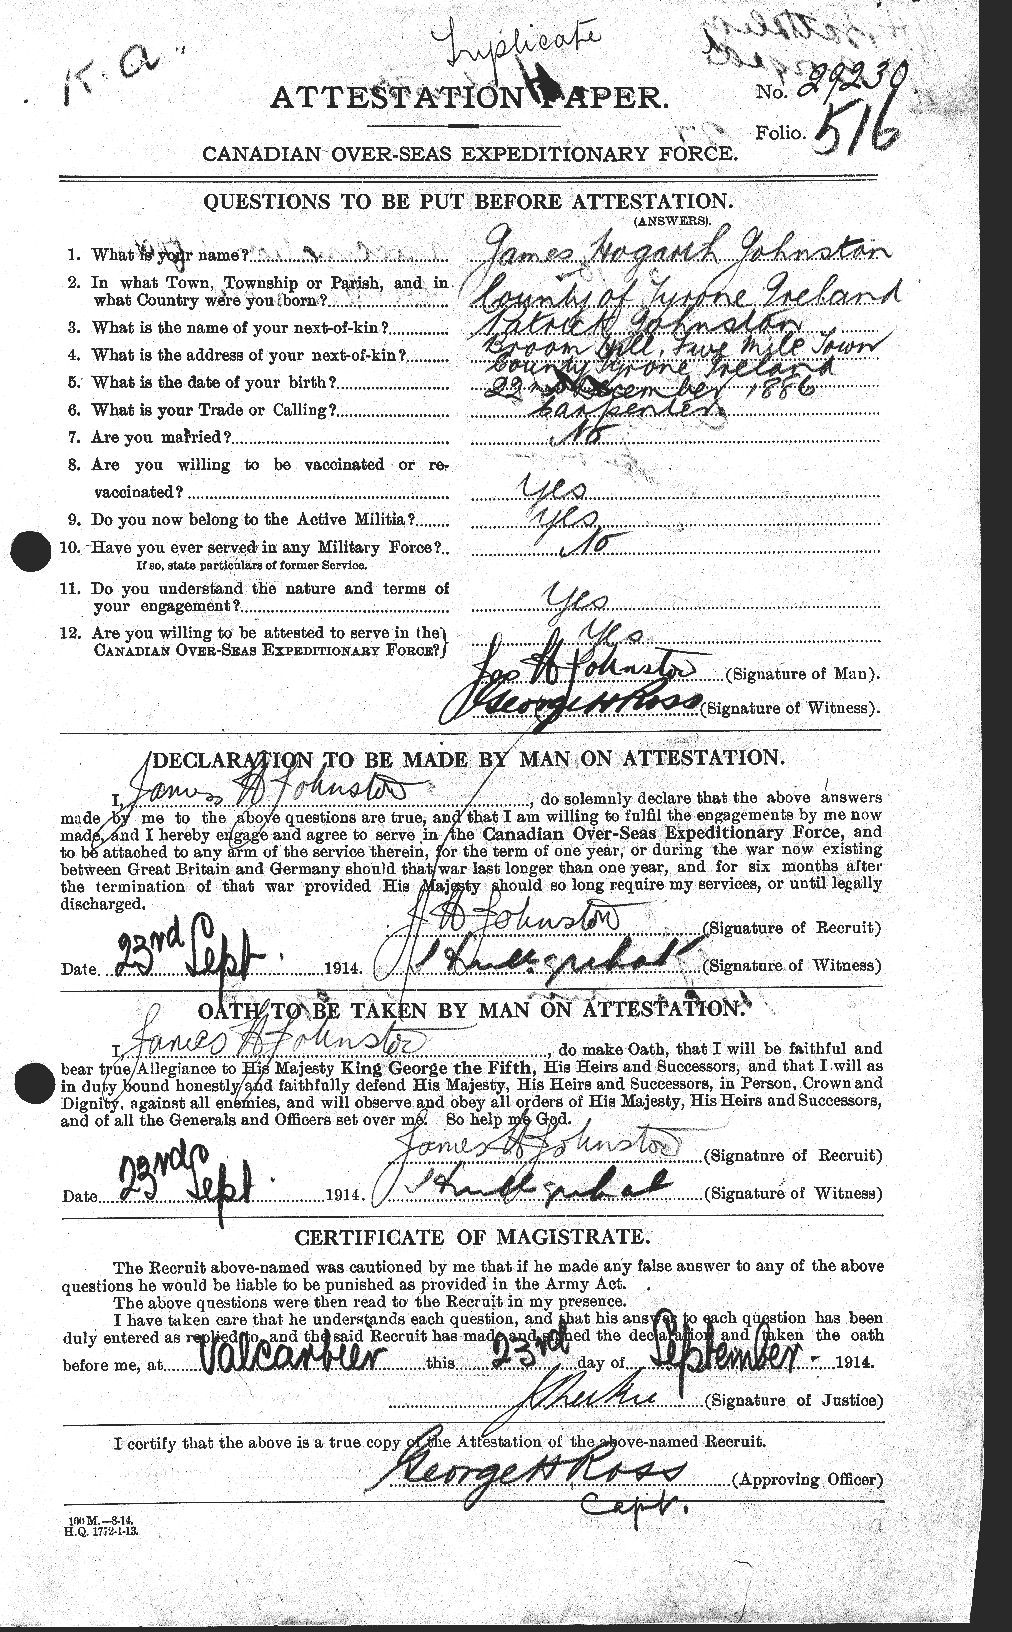 Personnel Records of the First World War - CEF 422739a